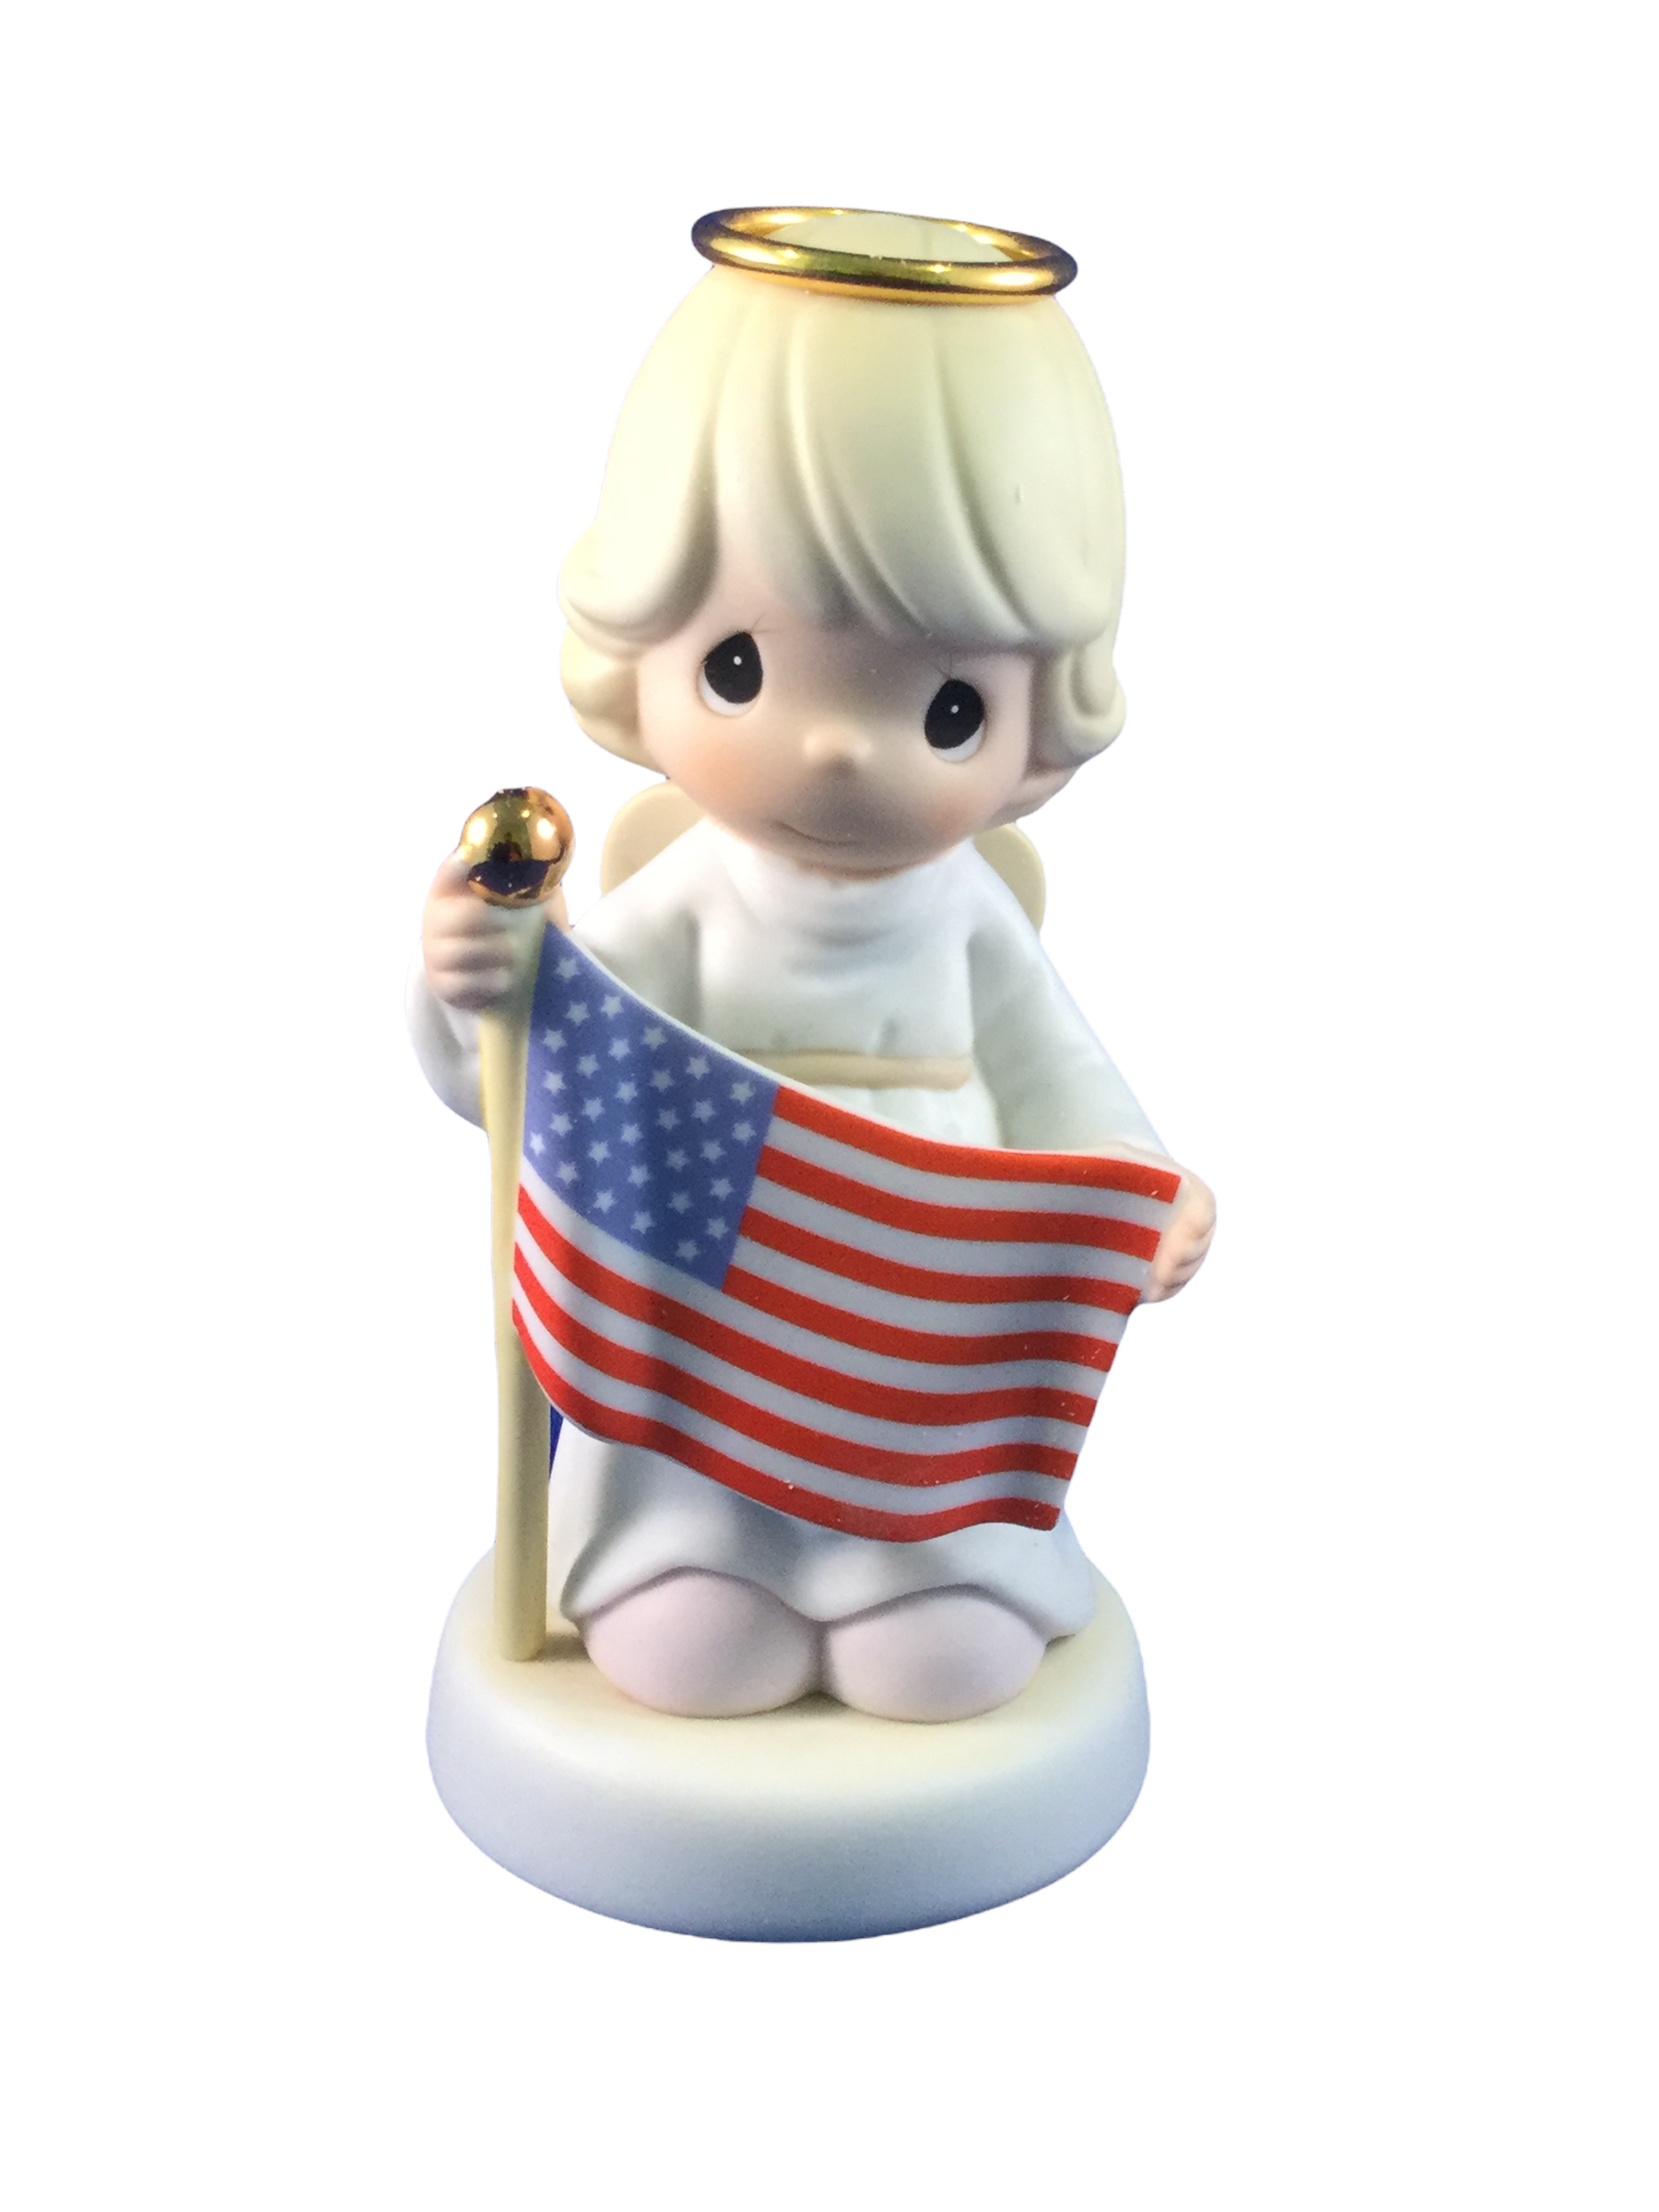 Stand Beside Her And Guide Her - Precious Moment Figurine